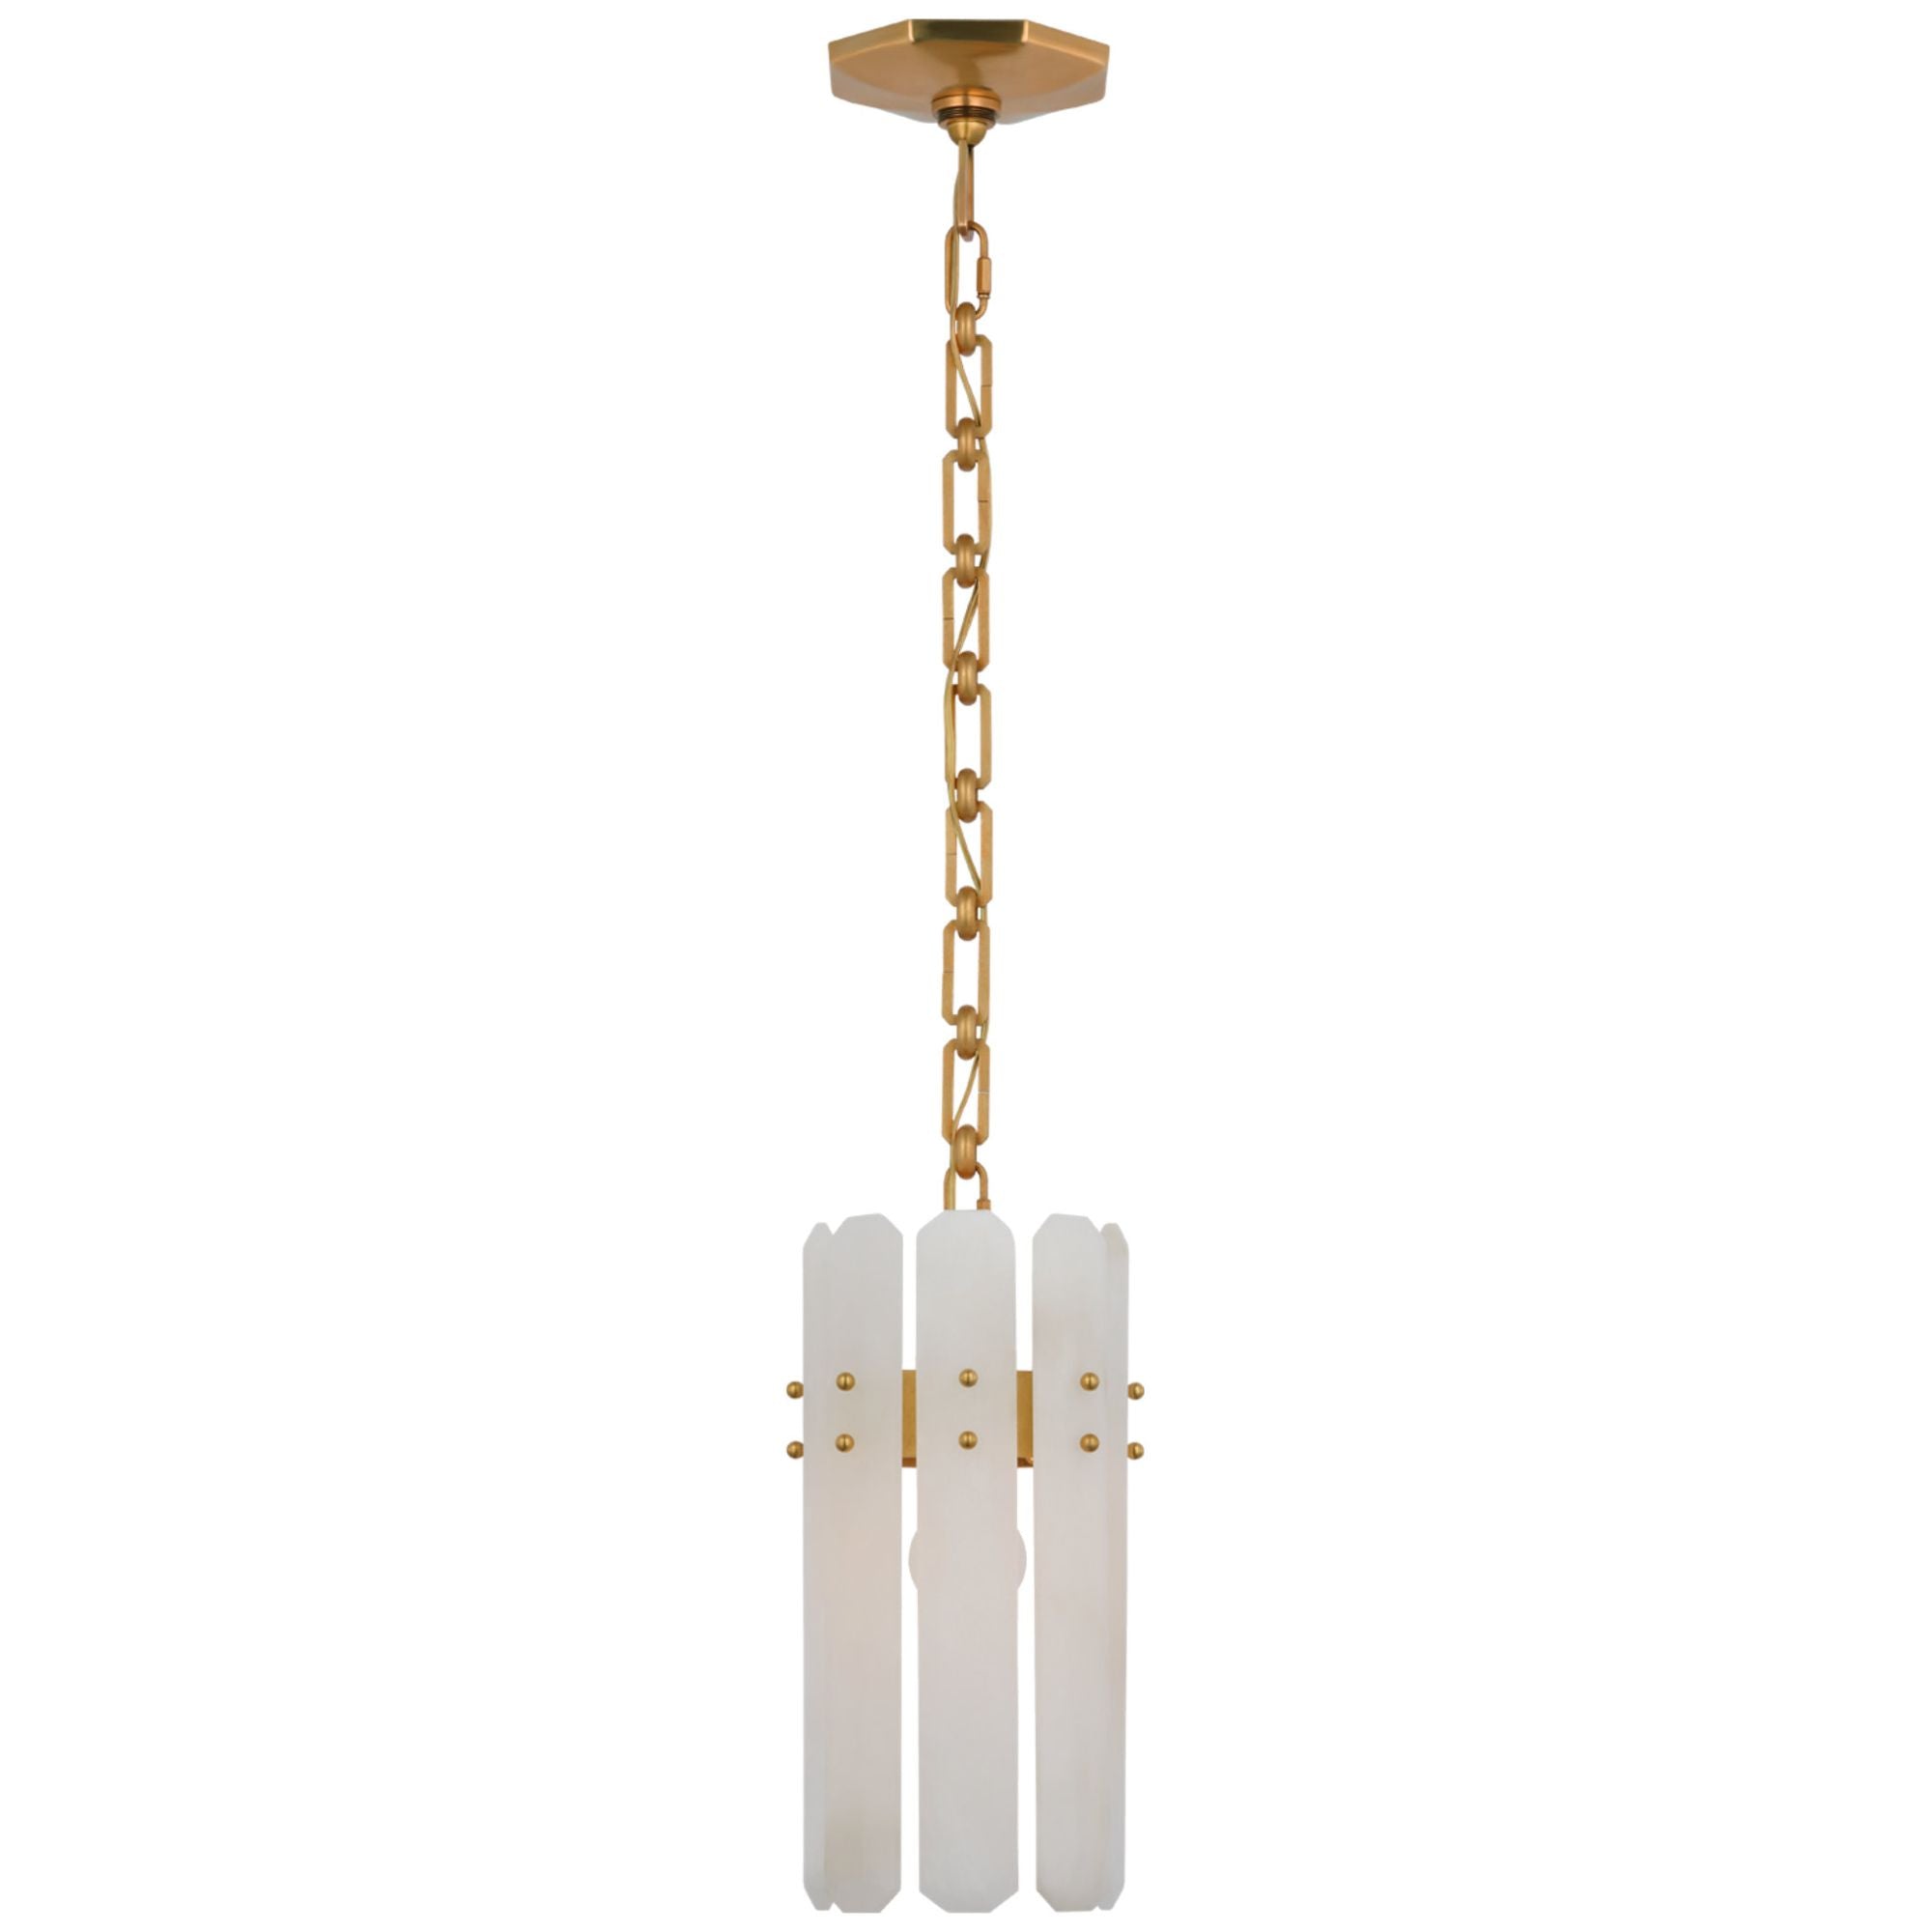 AERIN Bonnington Small Pendant in Hand-Rubbed Antique Brass with Alabaster